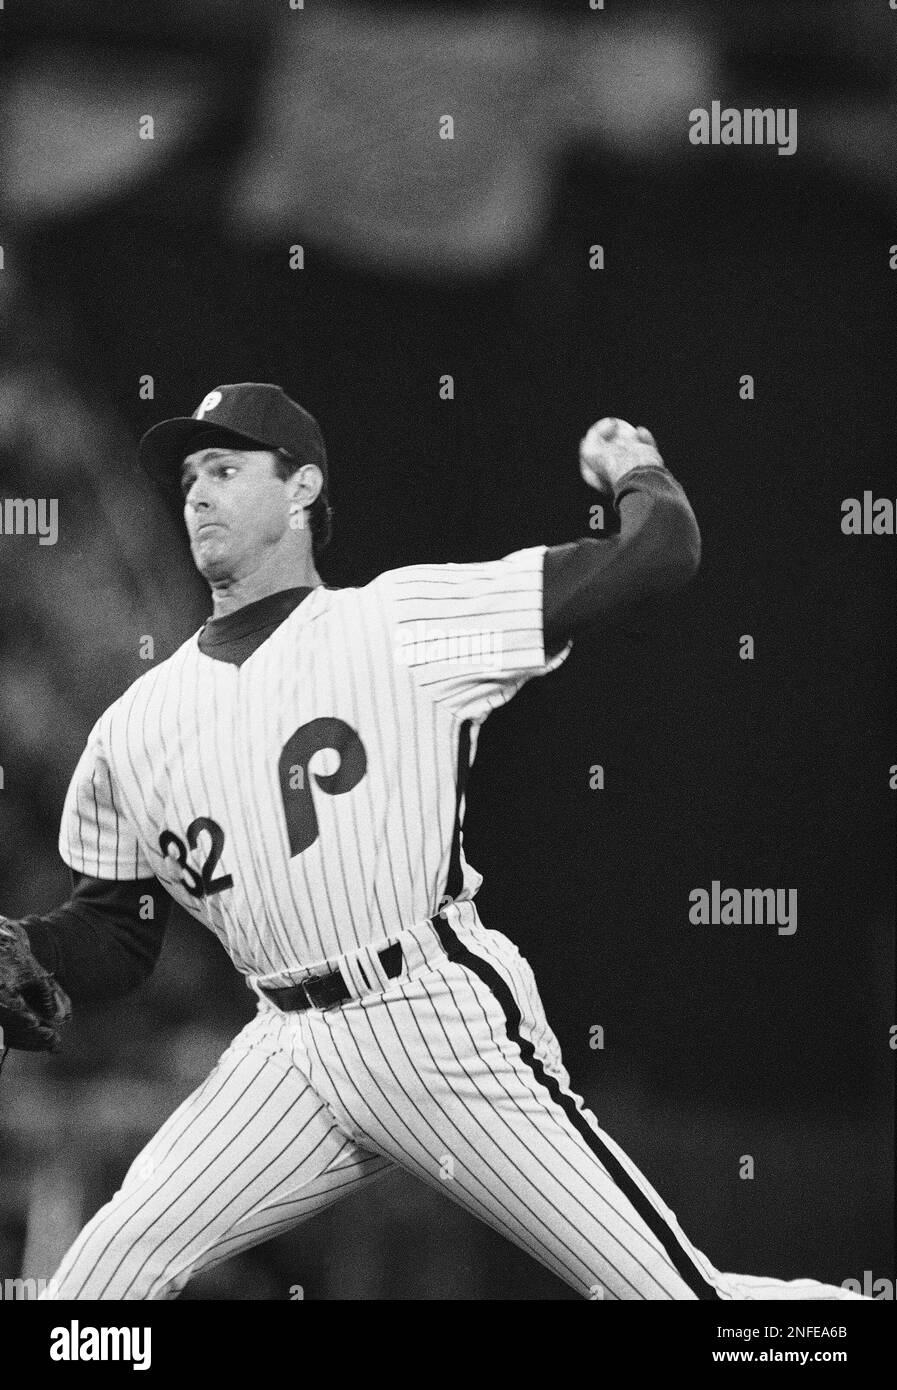 Philadelphia Phillies pitcher Steve Carlton delivers a pitch in